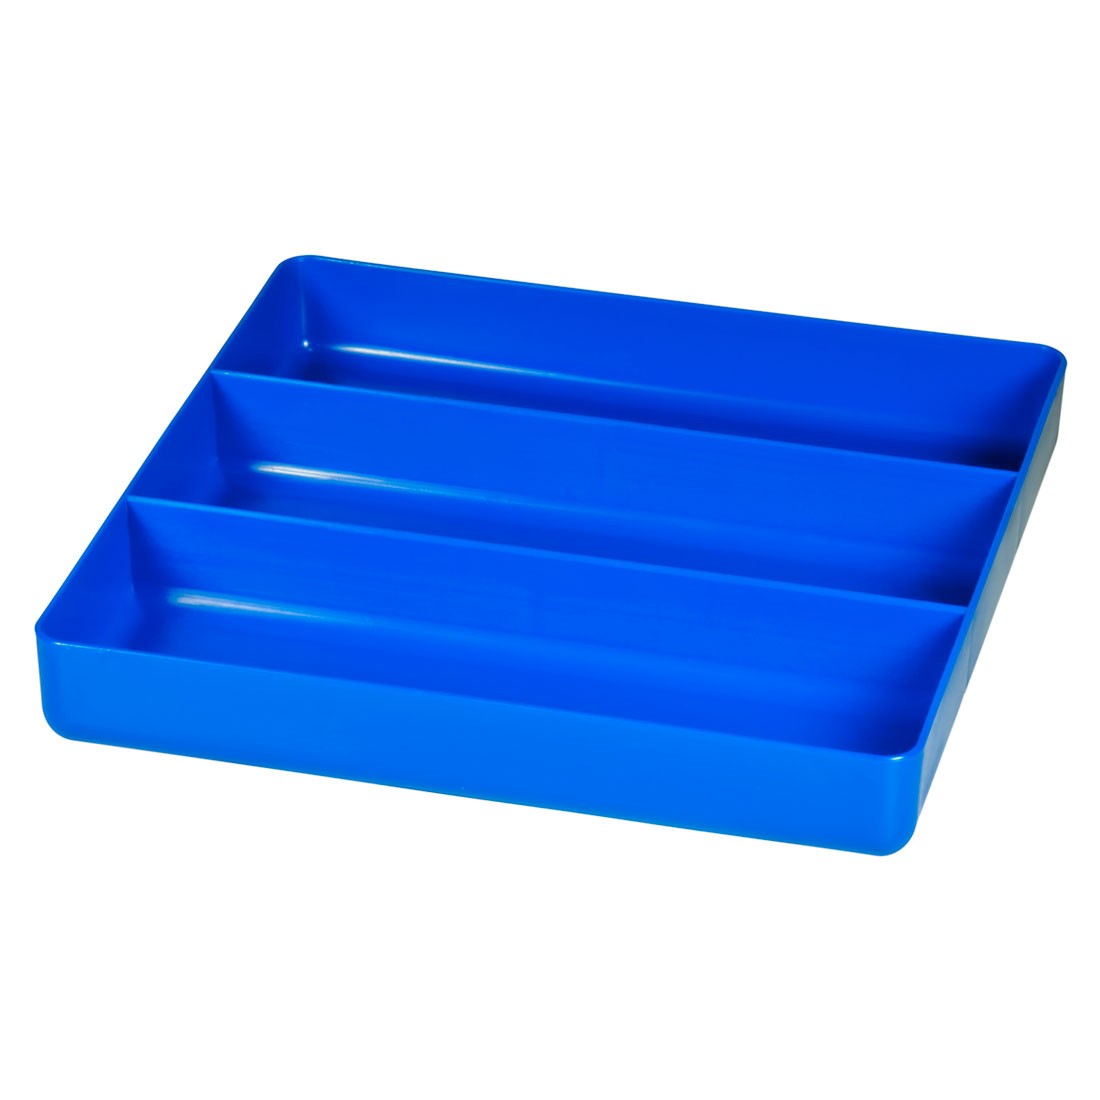 Ernst 5022 Blue Tool Organizer Tray 3 Compartment